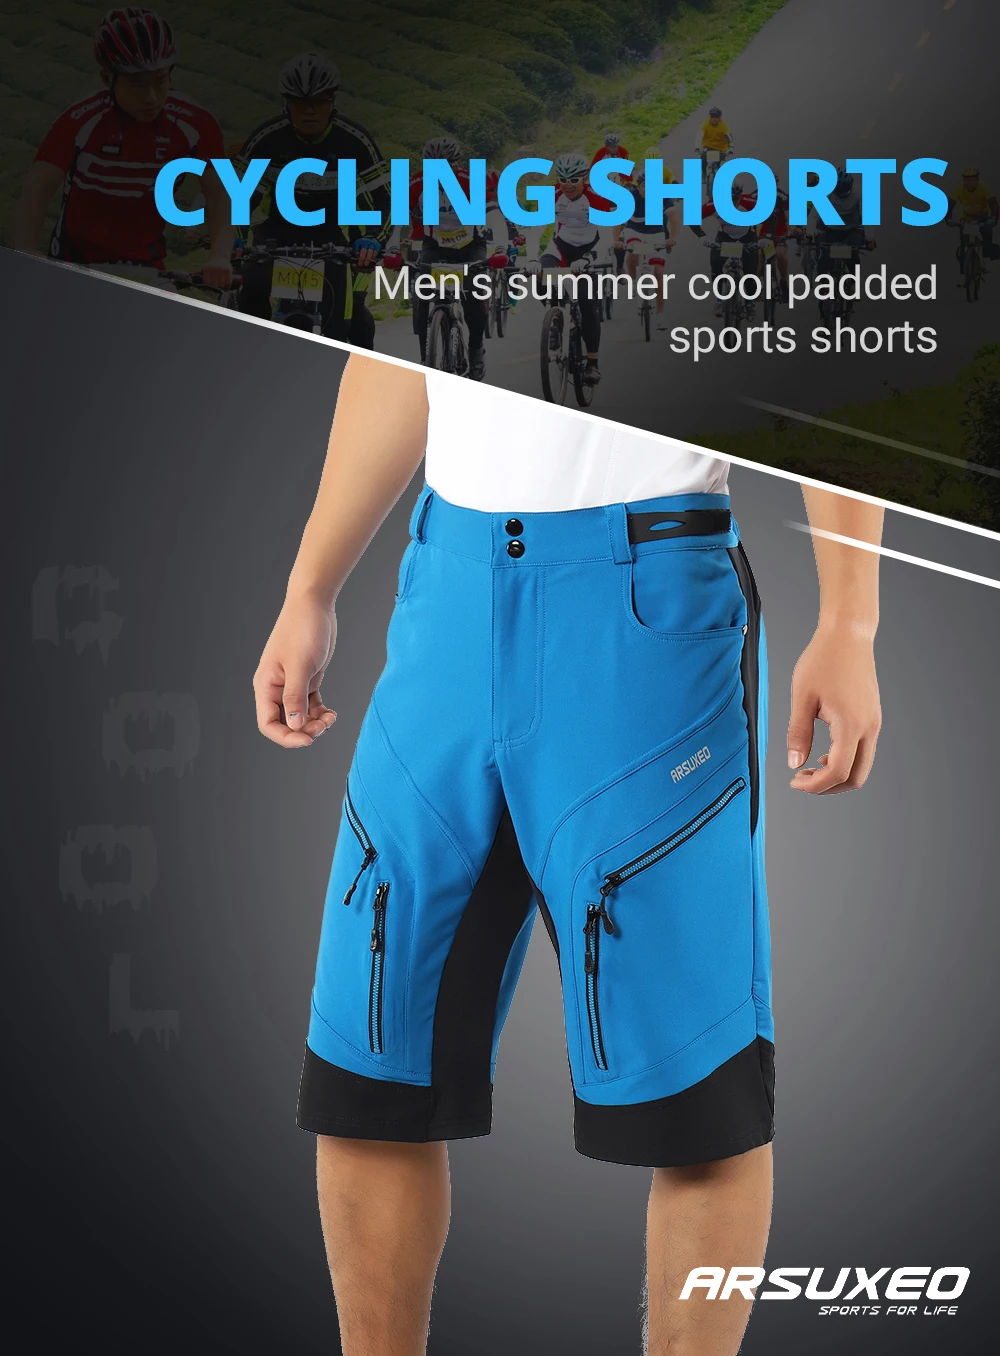 X-TIGER Men's Bicycle Shorts,Lightweight and Baggy No Padded Mountain Bike Shorts for Cycling Running Gym Training Shorts Pants for Off Road Cycling Outdoor Sports Leisure Bottoms